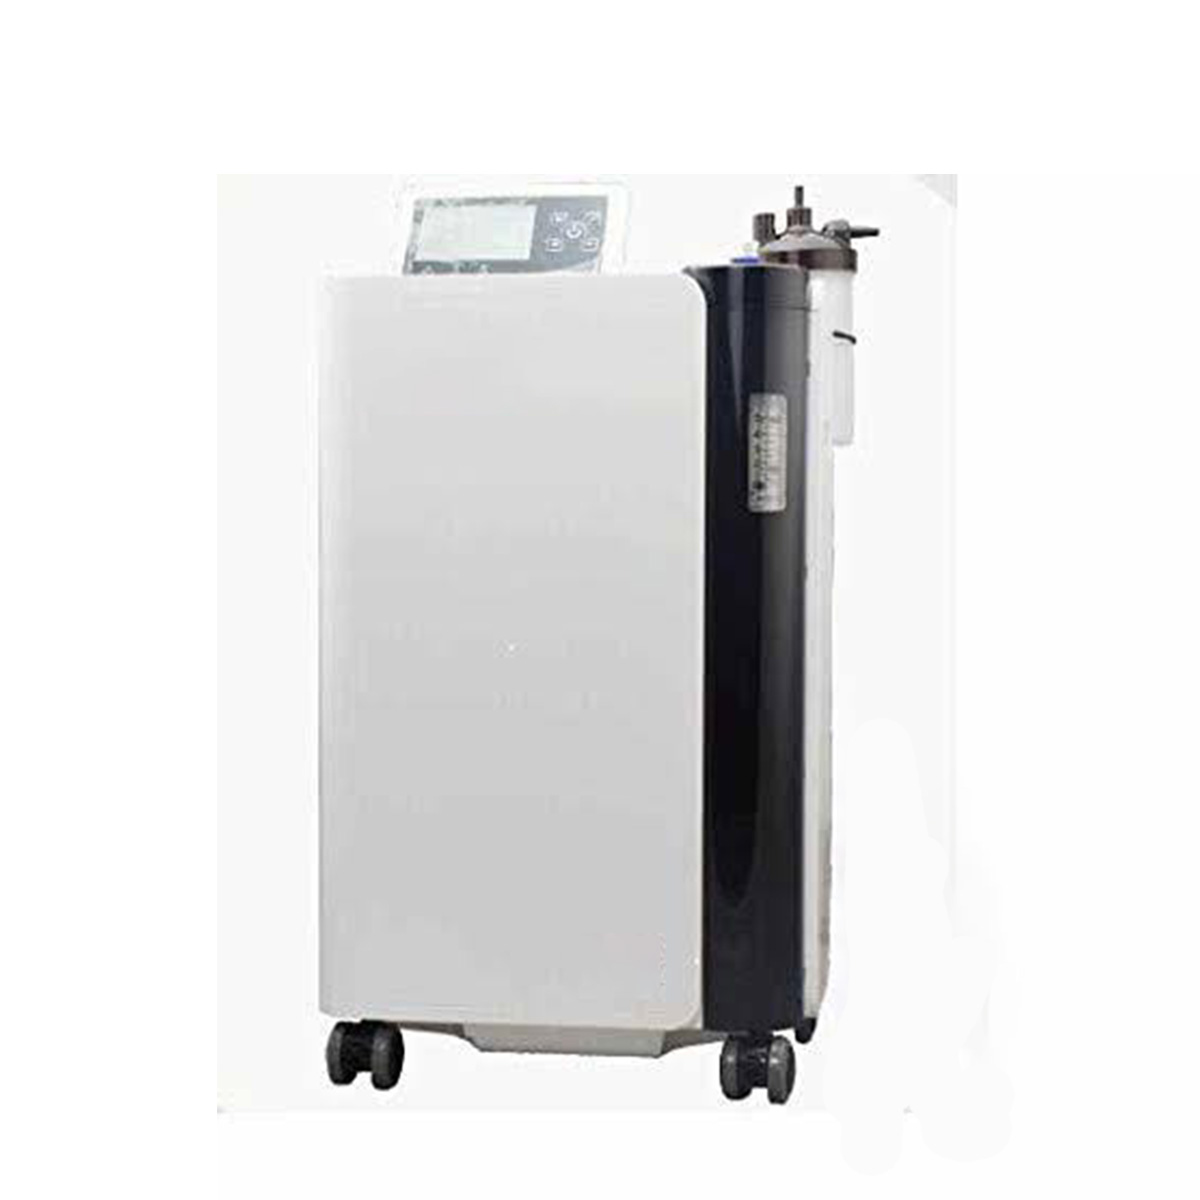 5 Lpm Oxymed Oxygen Concentrator On Sale Suppliers, Service Provider in Alpha greater noida